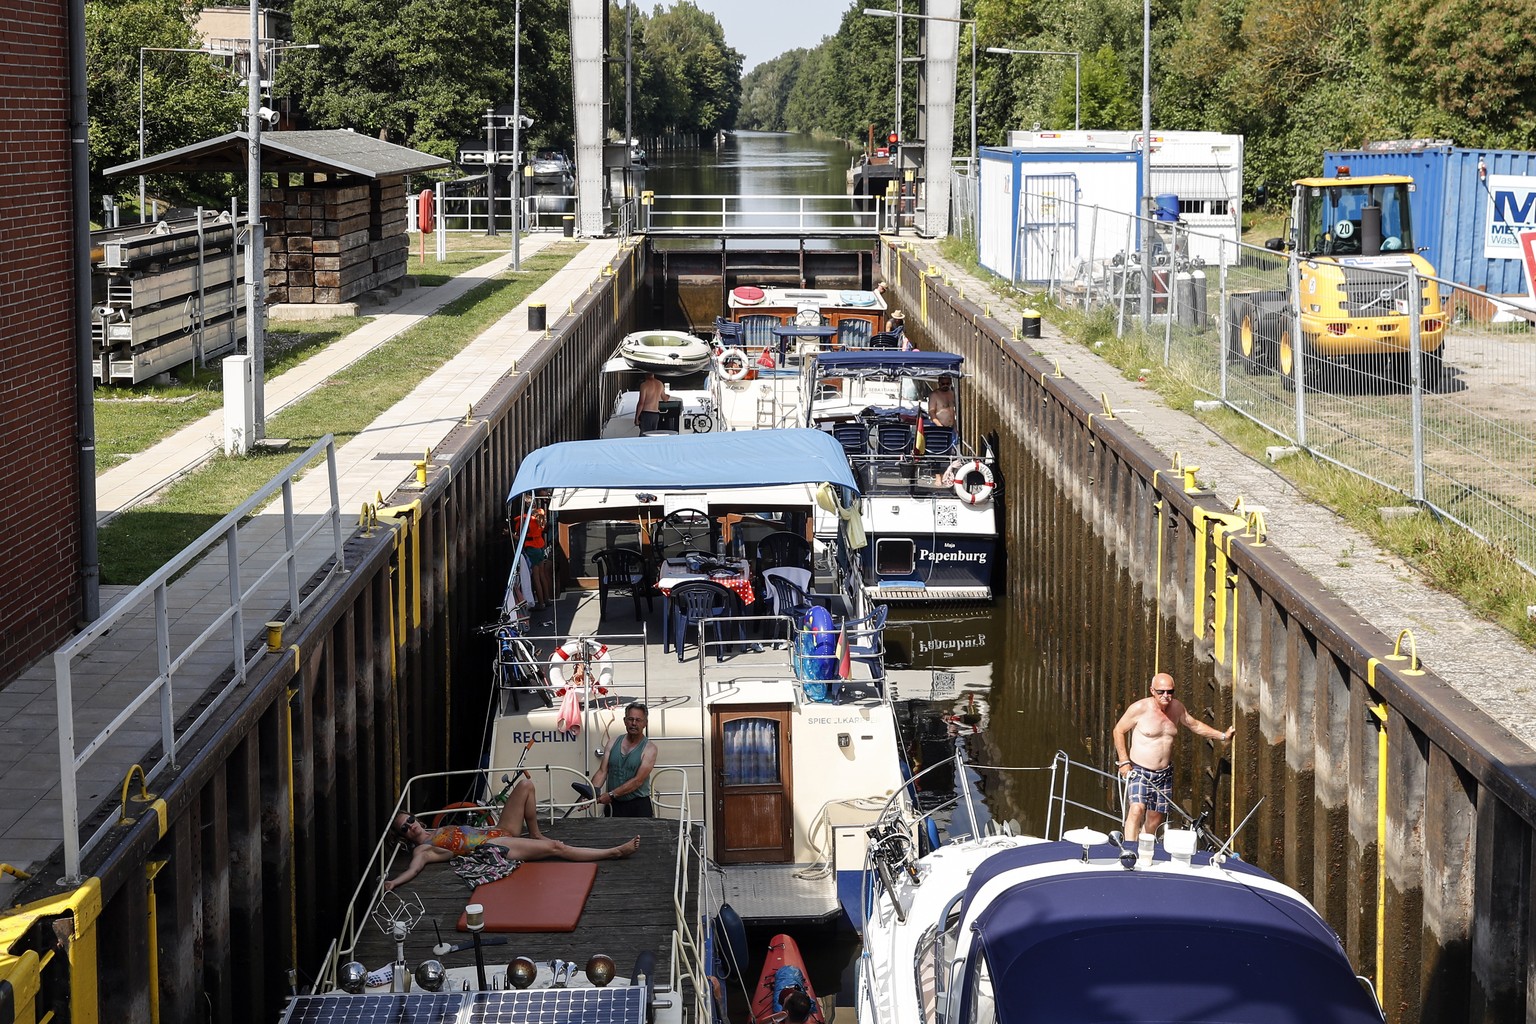 epa08589828 Boats use a canal lock on the Mirow lake near Mueritz, Germany, 07 August 2020. According to weather forecasts, temperatures over 30 degrees Celsius are expected over the weekend in north- ...